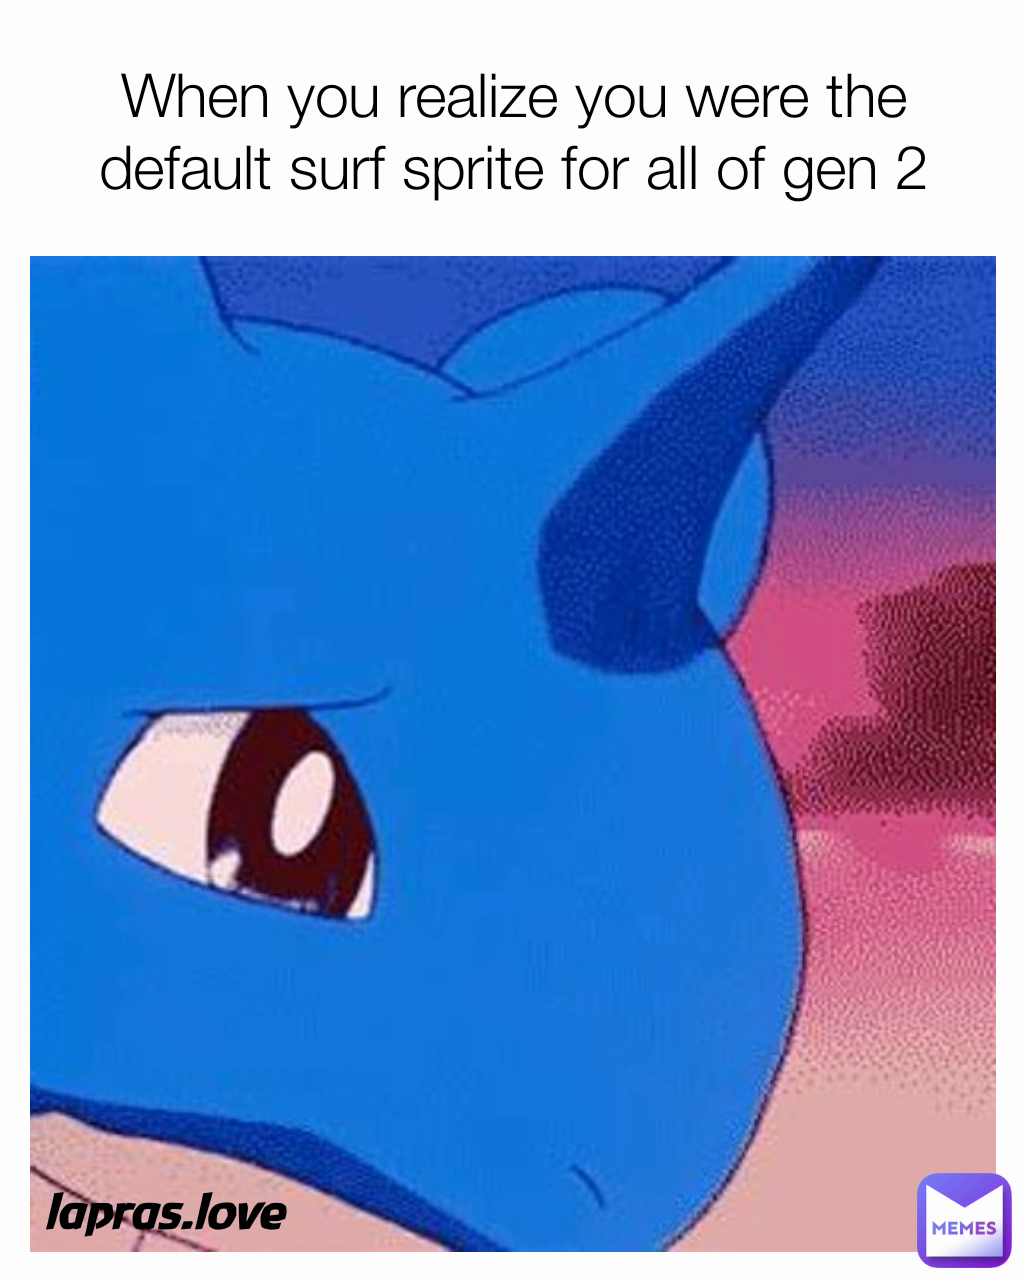 When you realize you were the default surf sprite for all of gen 2 lapras.love